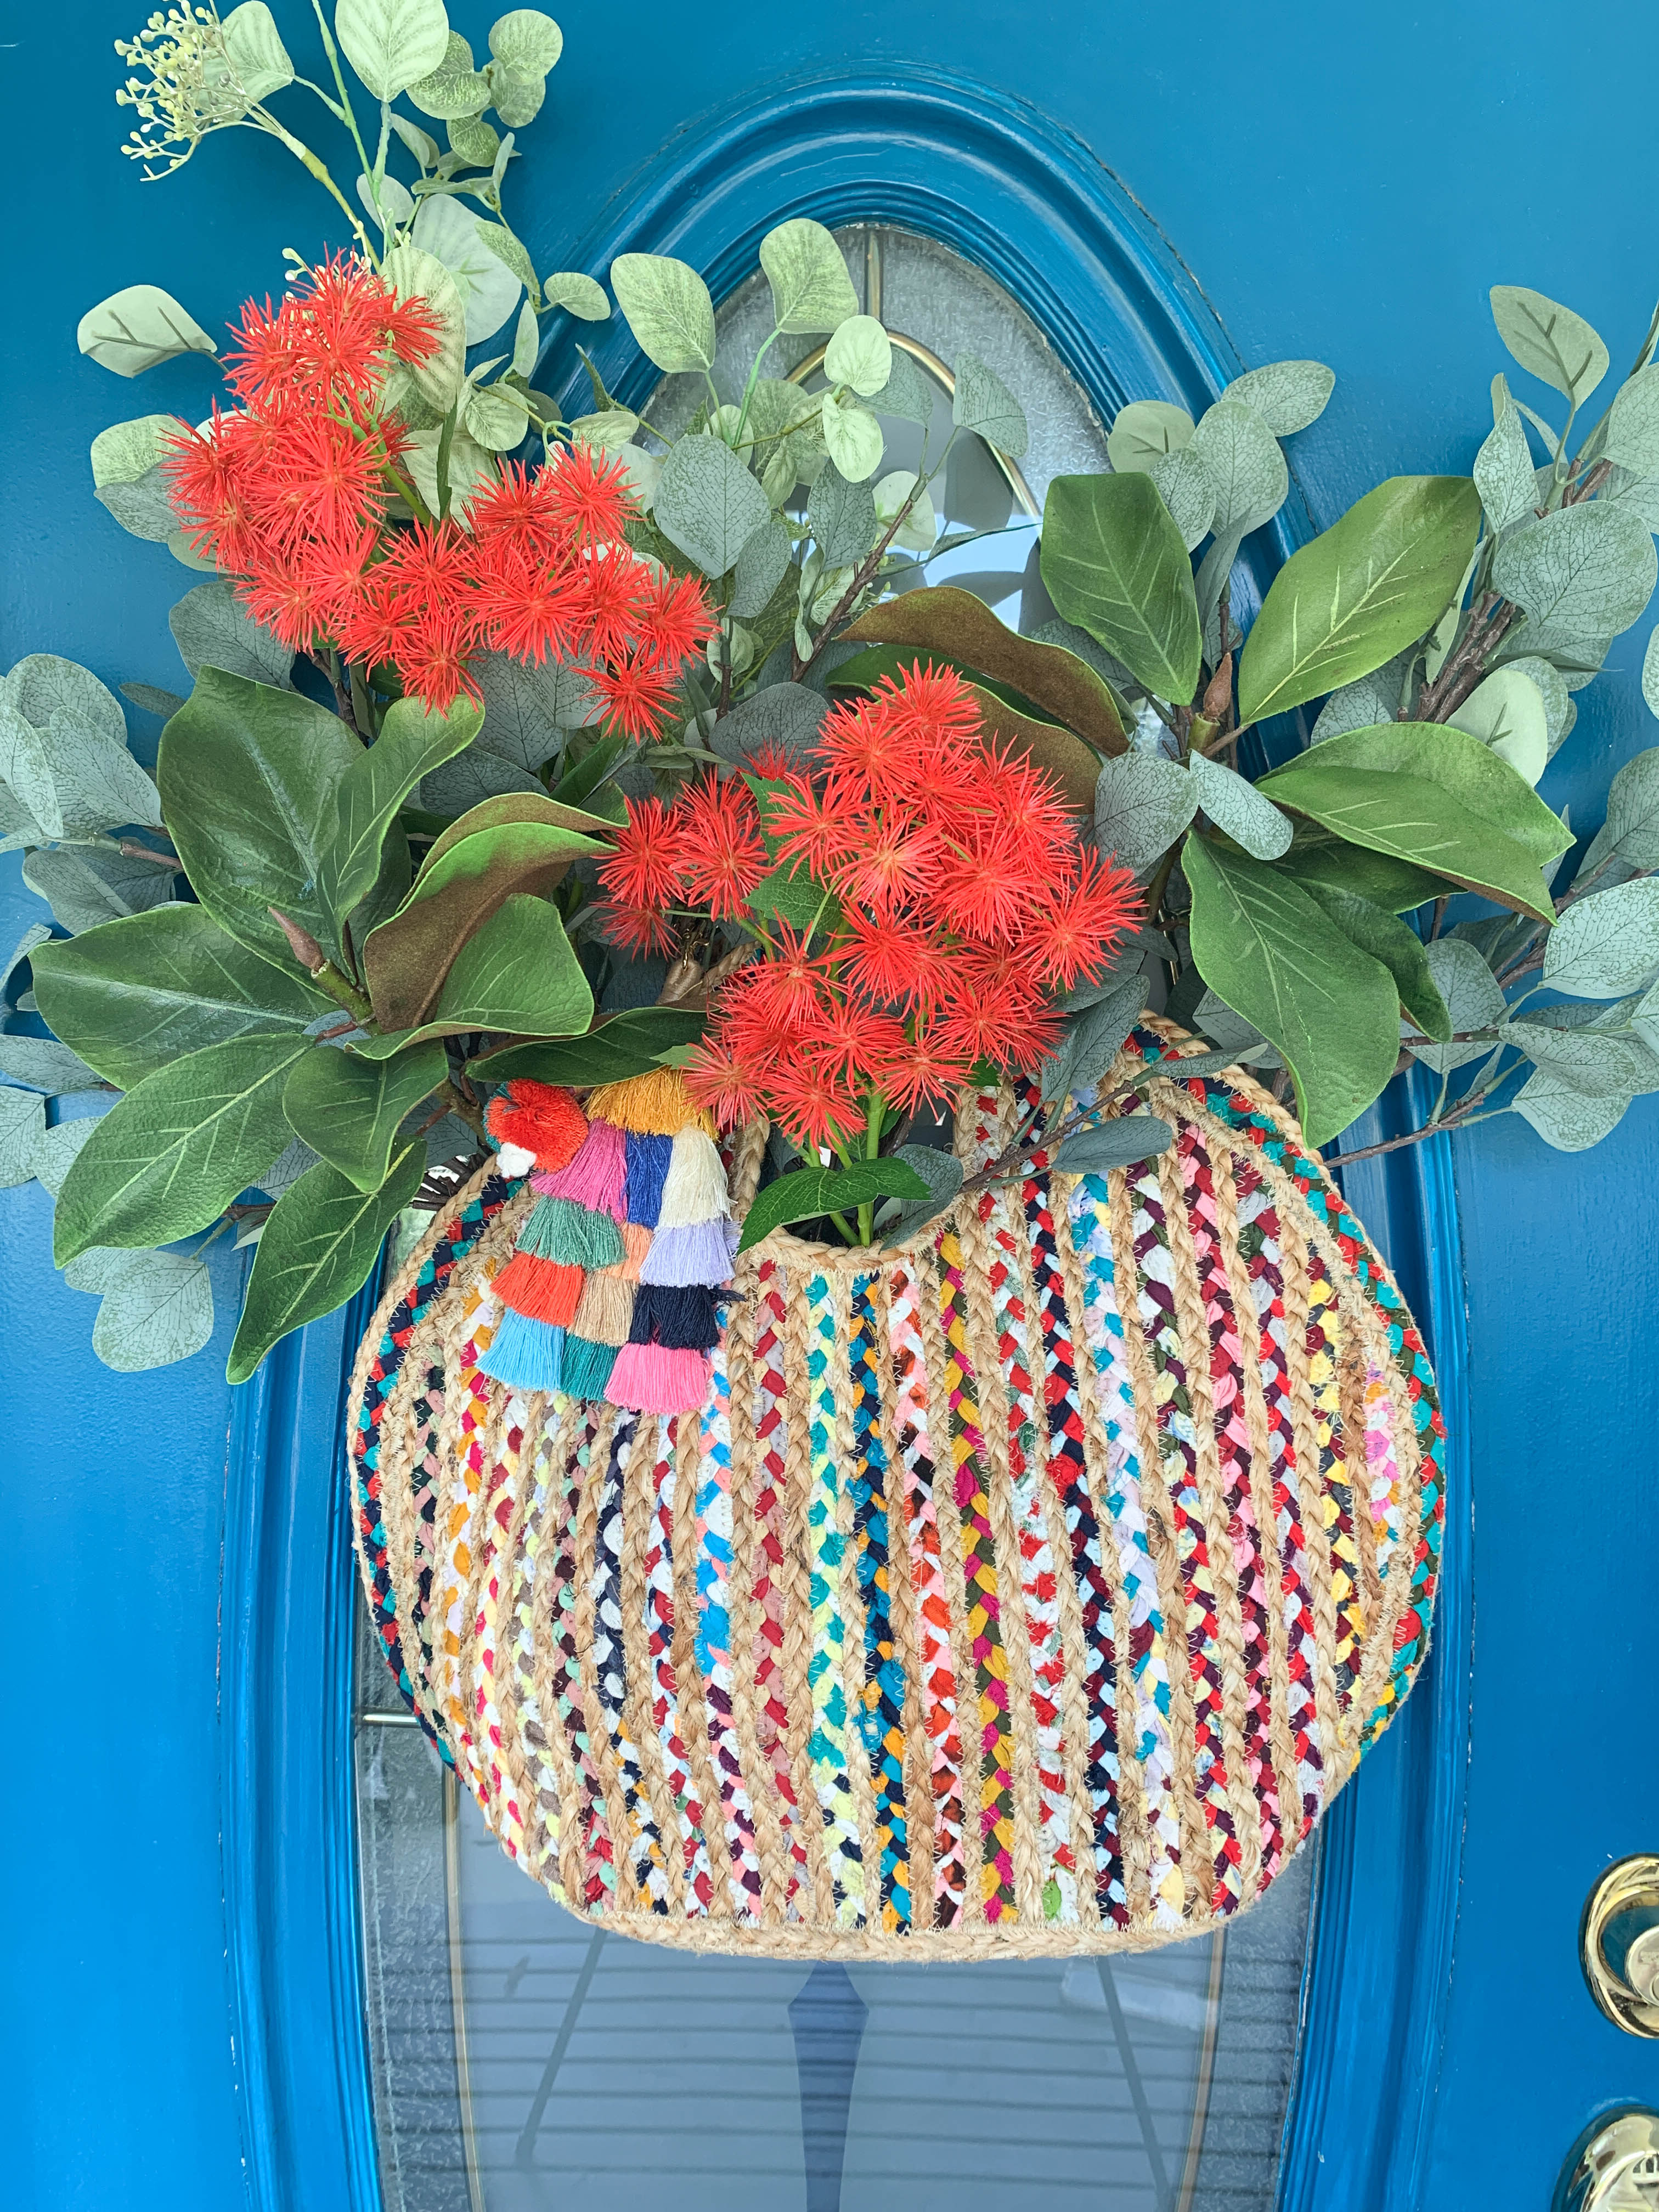 A multi-colored woven bag full of faux greenery and flowers and hanging on the front door as decor.